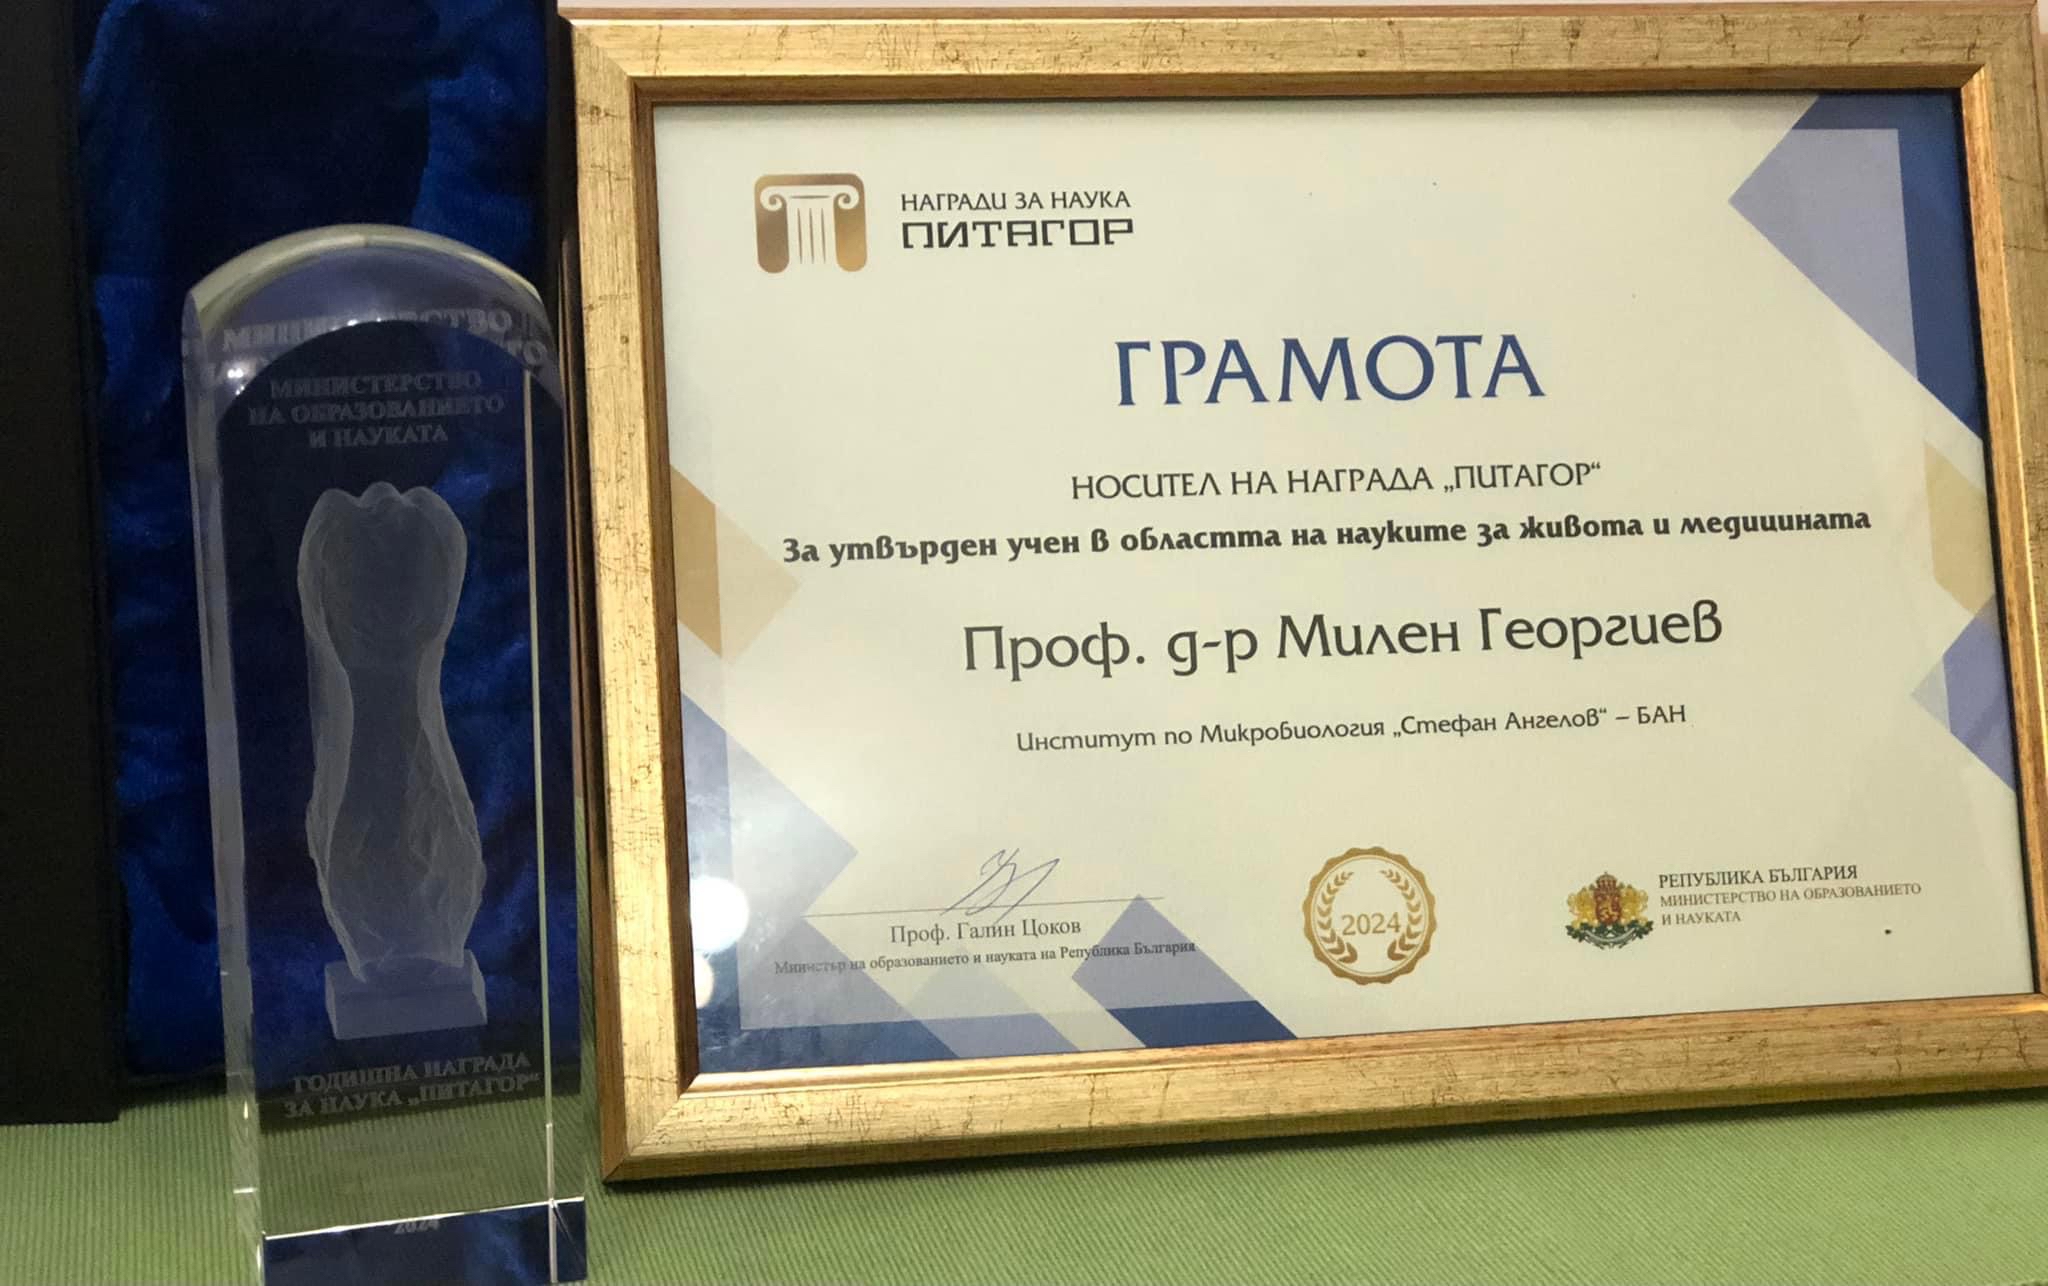 PROF. DR. MILEN GEORGIEV FROM THE INSTITUTE OF MICROBIOLOGY STEFAN ANGELOV AT THE BULGARIAN ACADEMY OF SCIENCES (BAS) HAS ONCE AGAIN BEEN AWARDED THE PYTHAGORAS AWARD FOR AN ESTABLISHED SCIENTIST IN THE FIELD OF SCIENCE